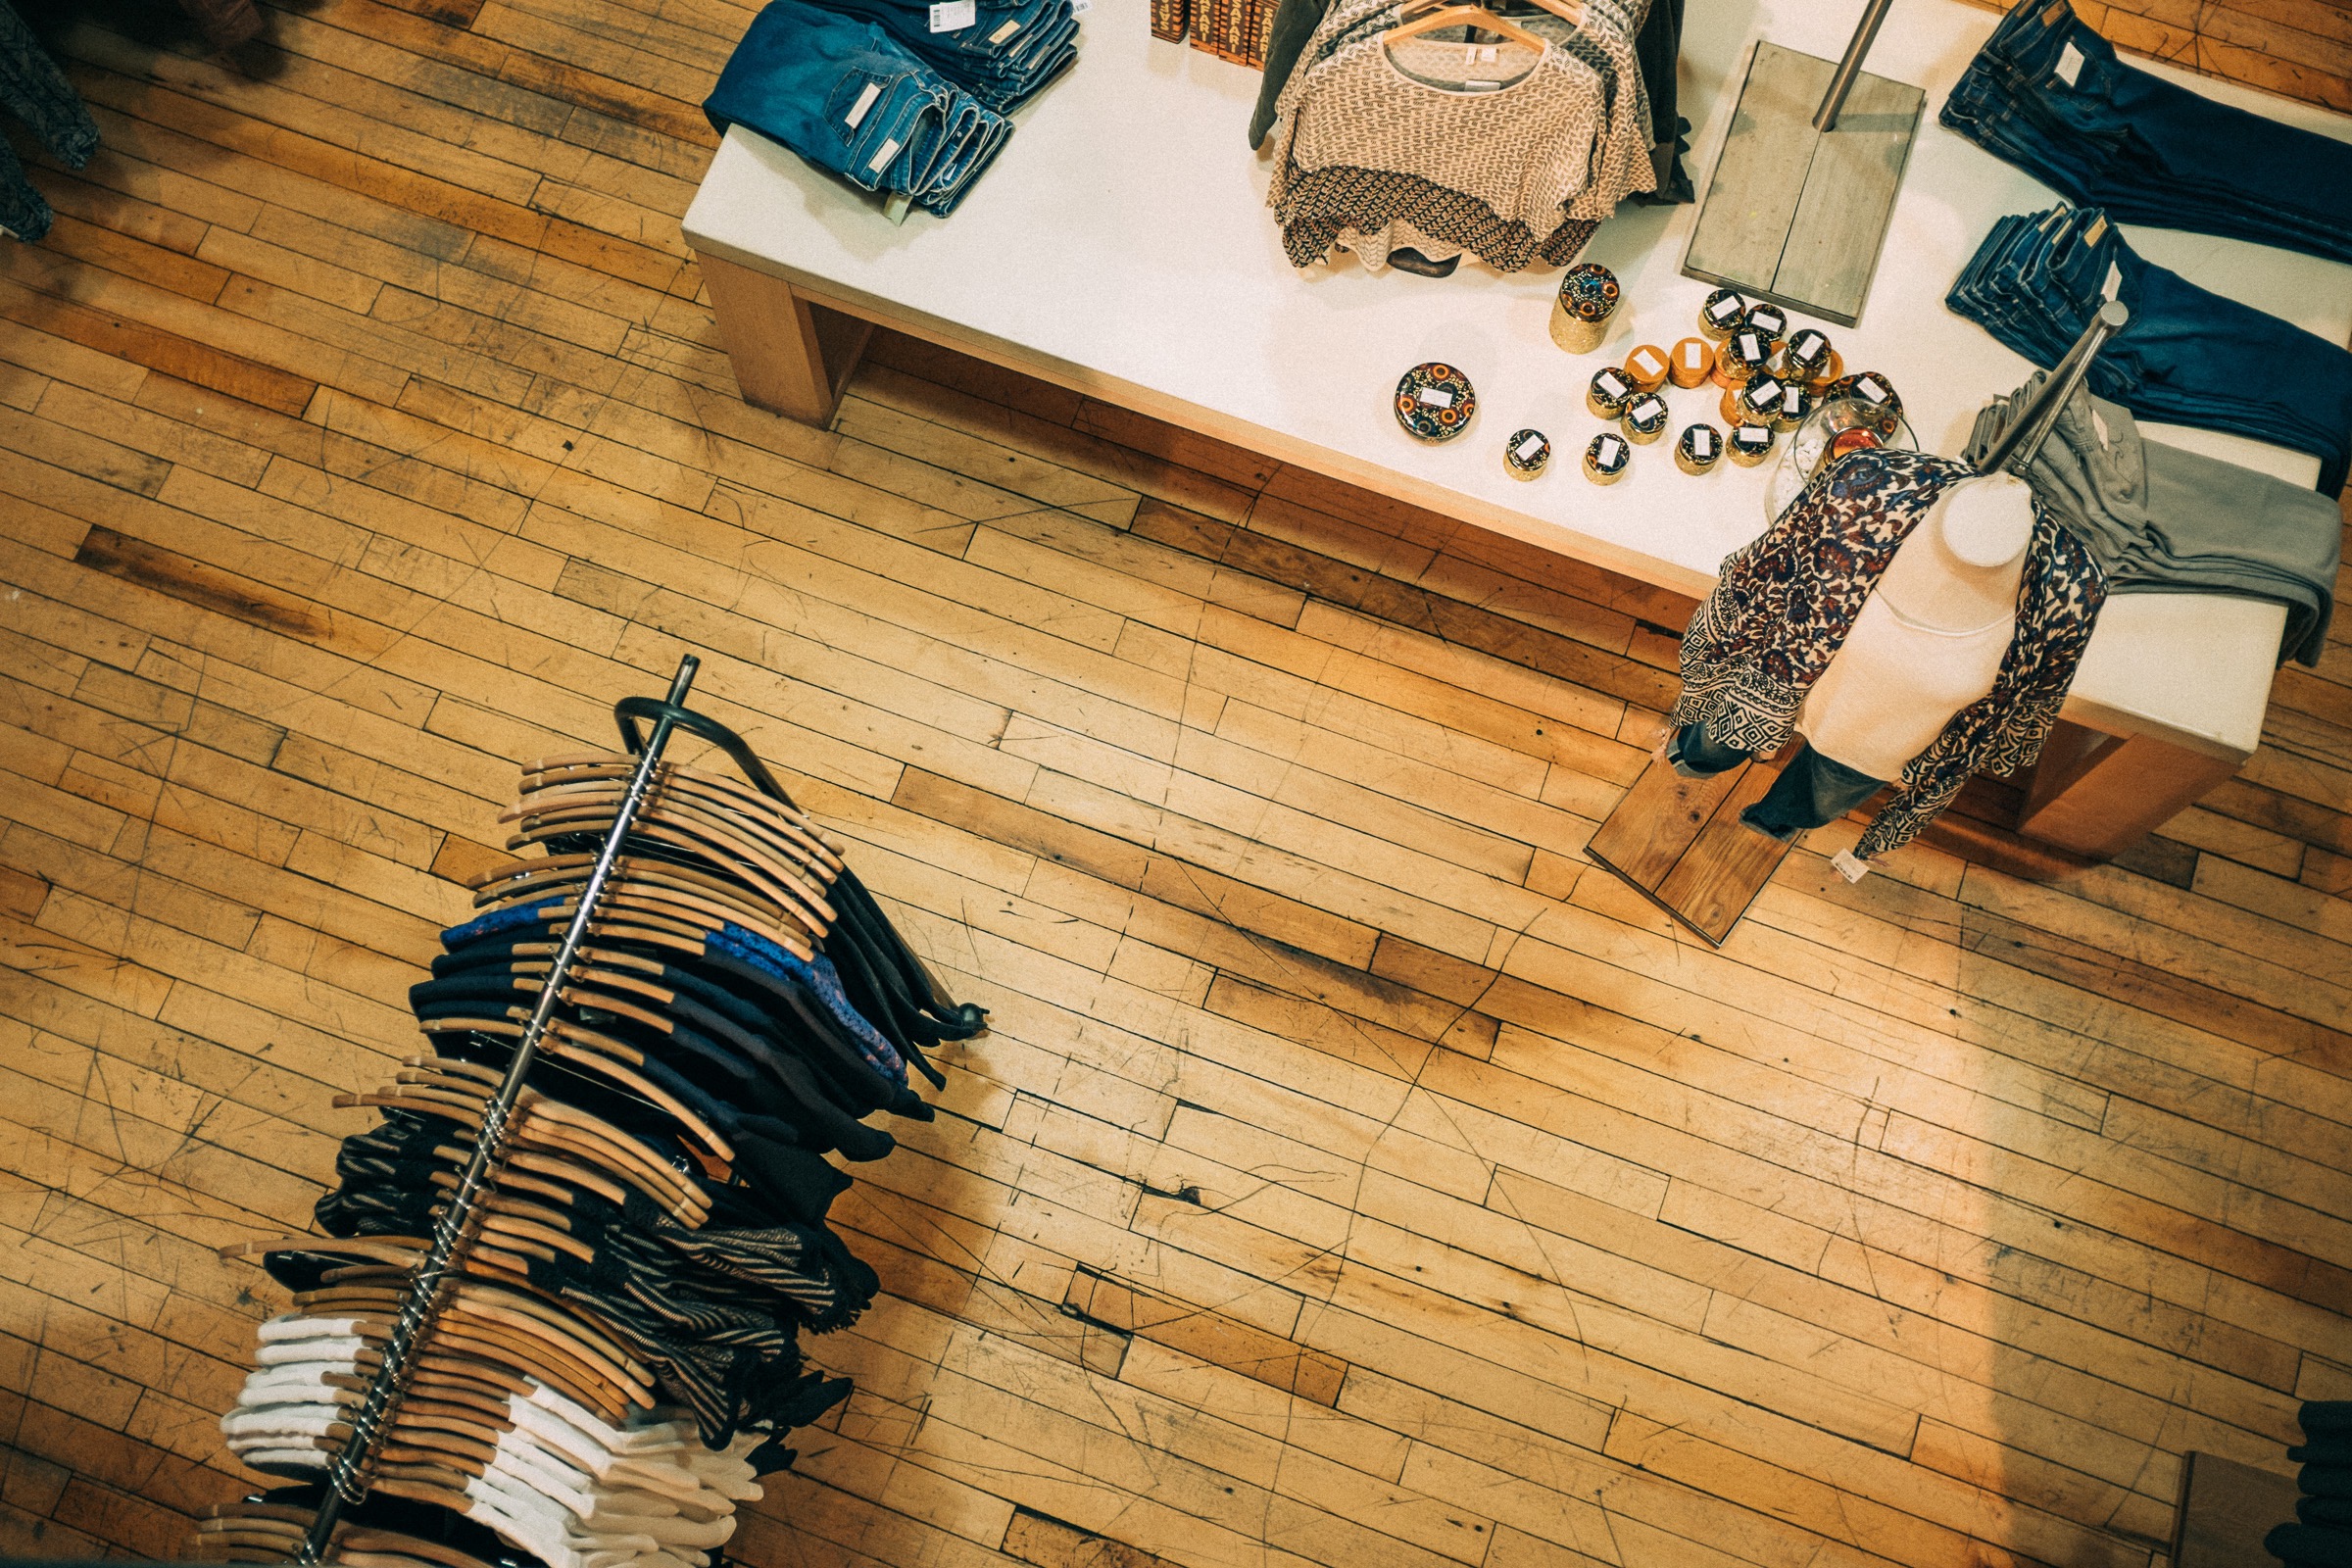 Pop Up 101: How To Design Your Pop-Up Store Layout